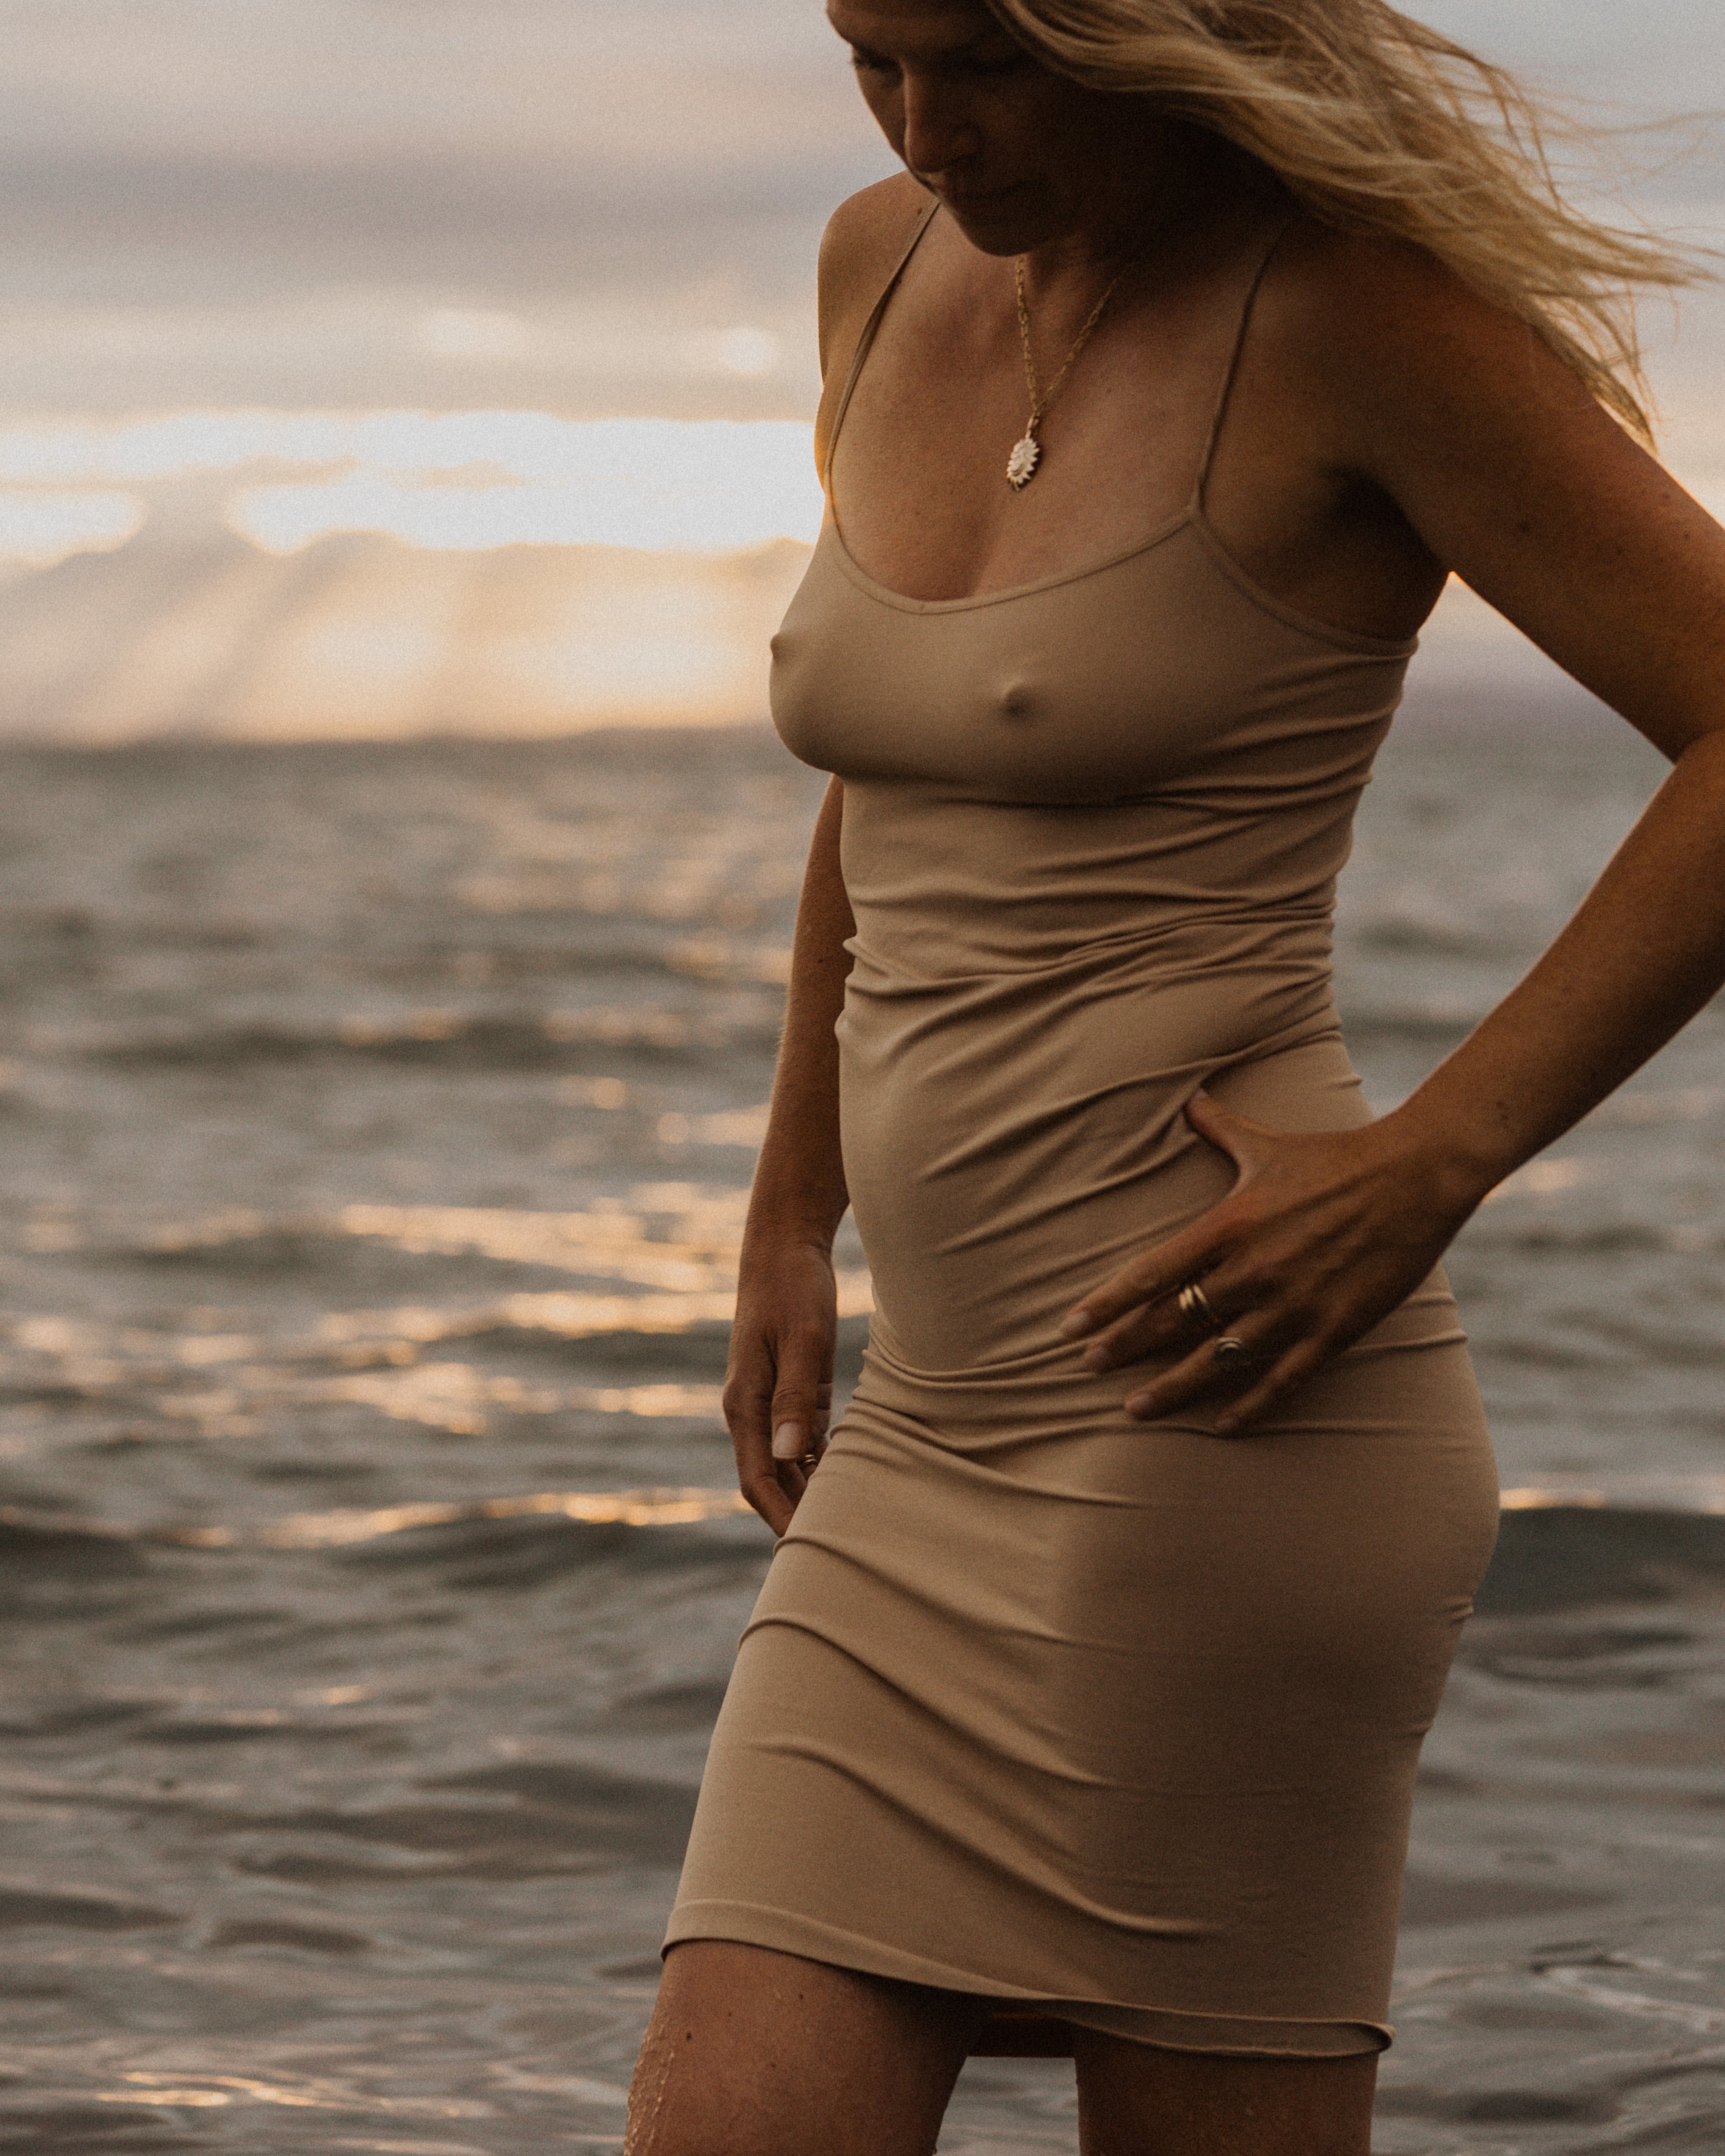 a woman standing in front of the ocean wearing a beige dress, a bronze sun pendant on a gold chain and stacked bronze rings on her fingers